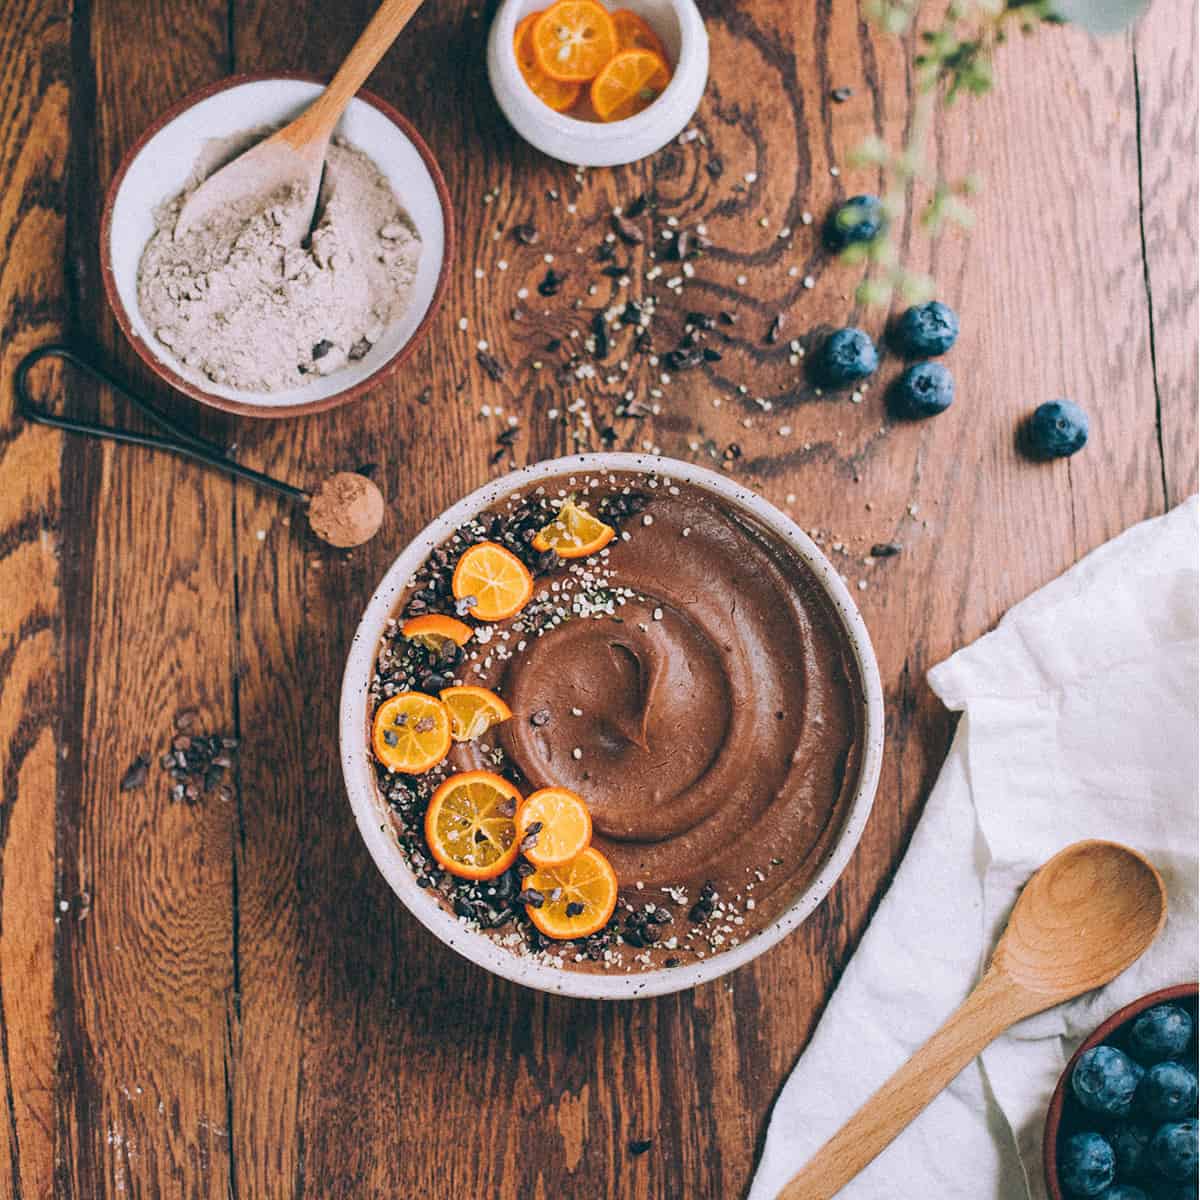 Chocolate teff porridge with orange slices placed on top on a staged wooden tabletop.